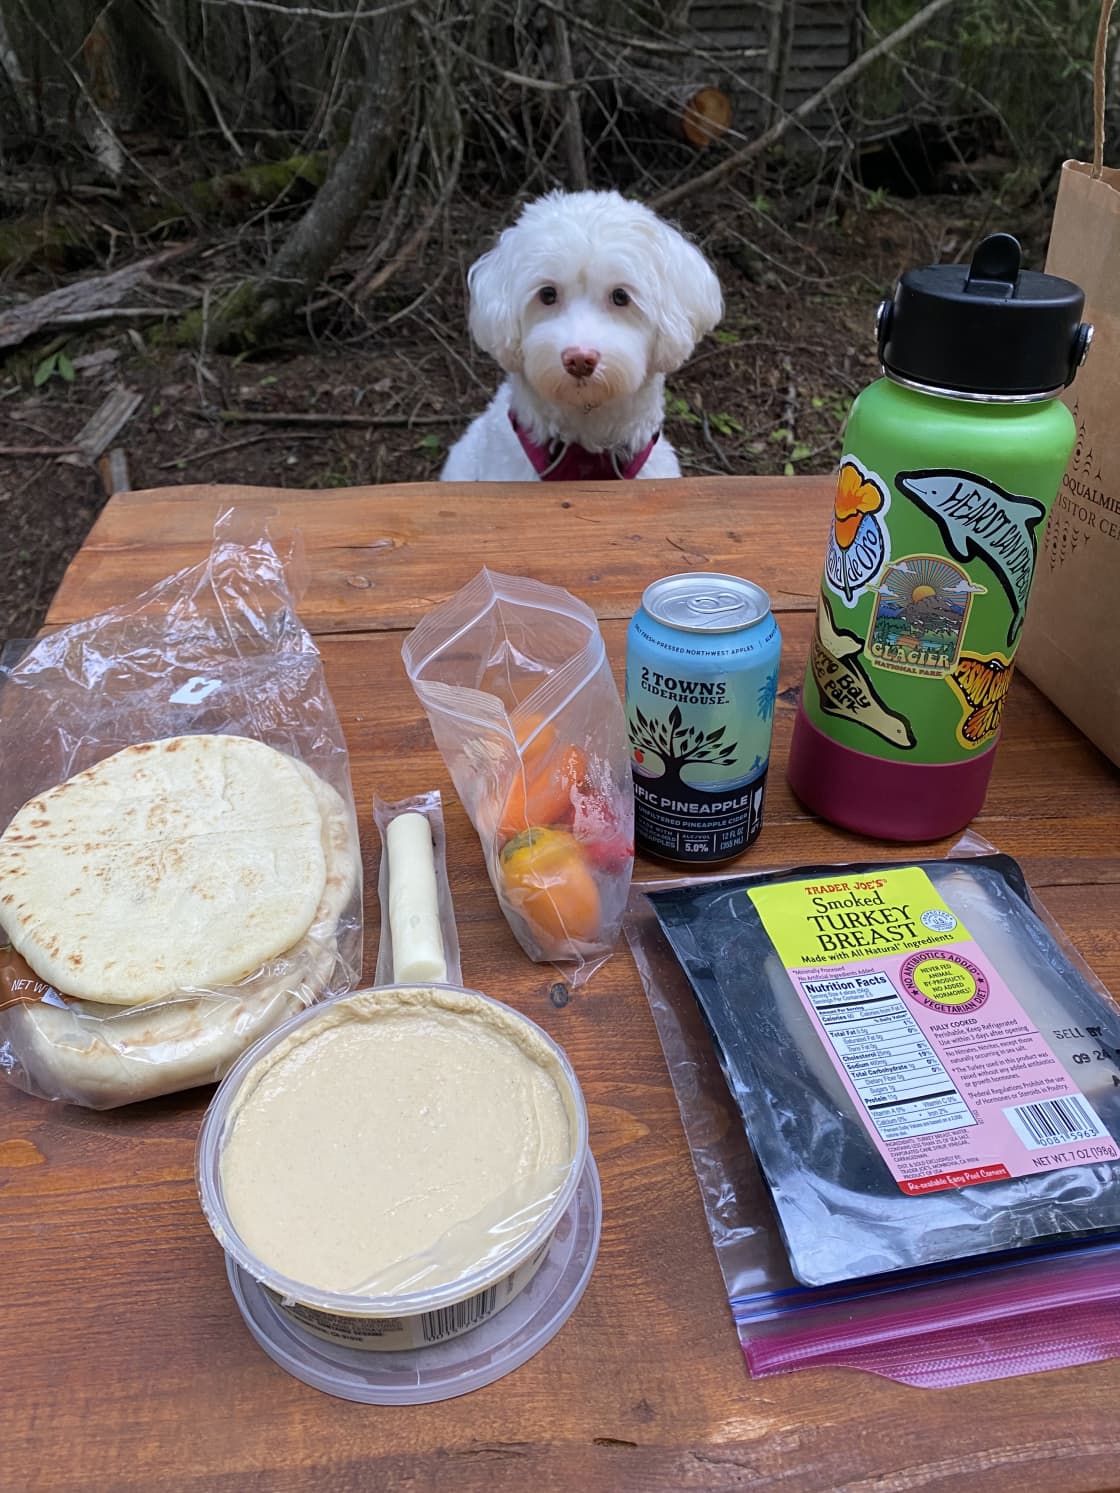 Camp dinner with Millie